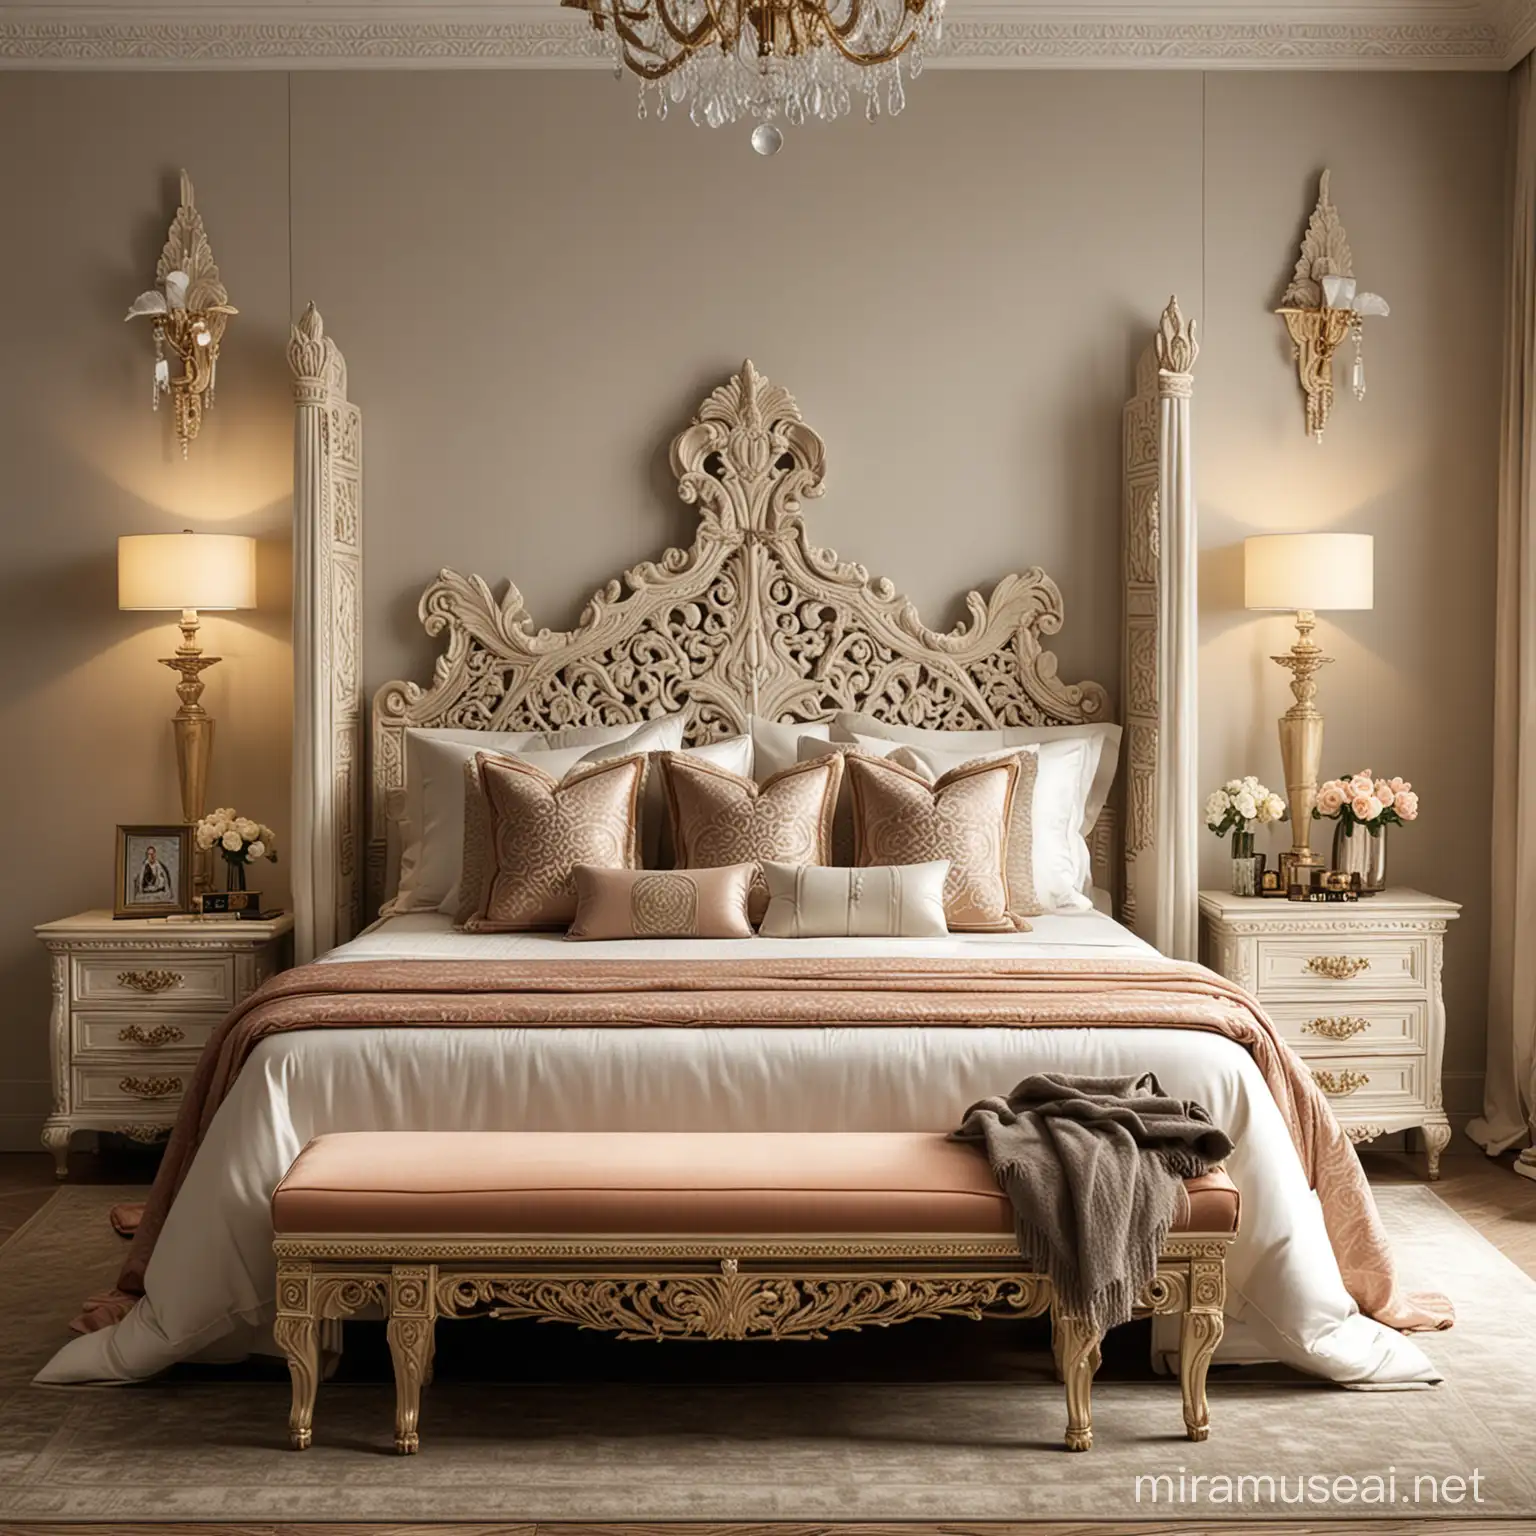 Luxurious EgyptianStyle Bedroom with Ornate Furniture and FullLength Mirror